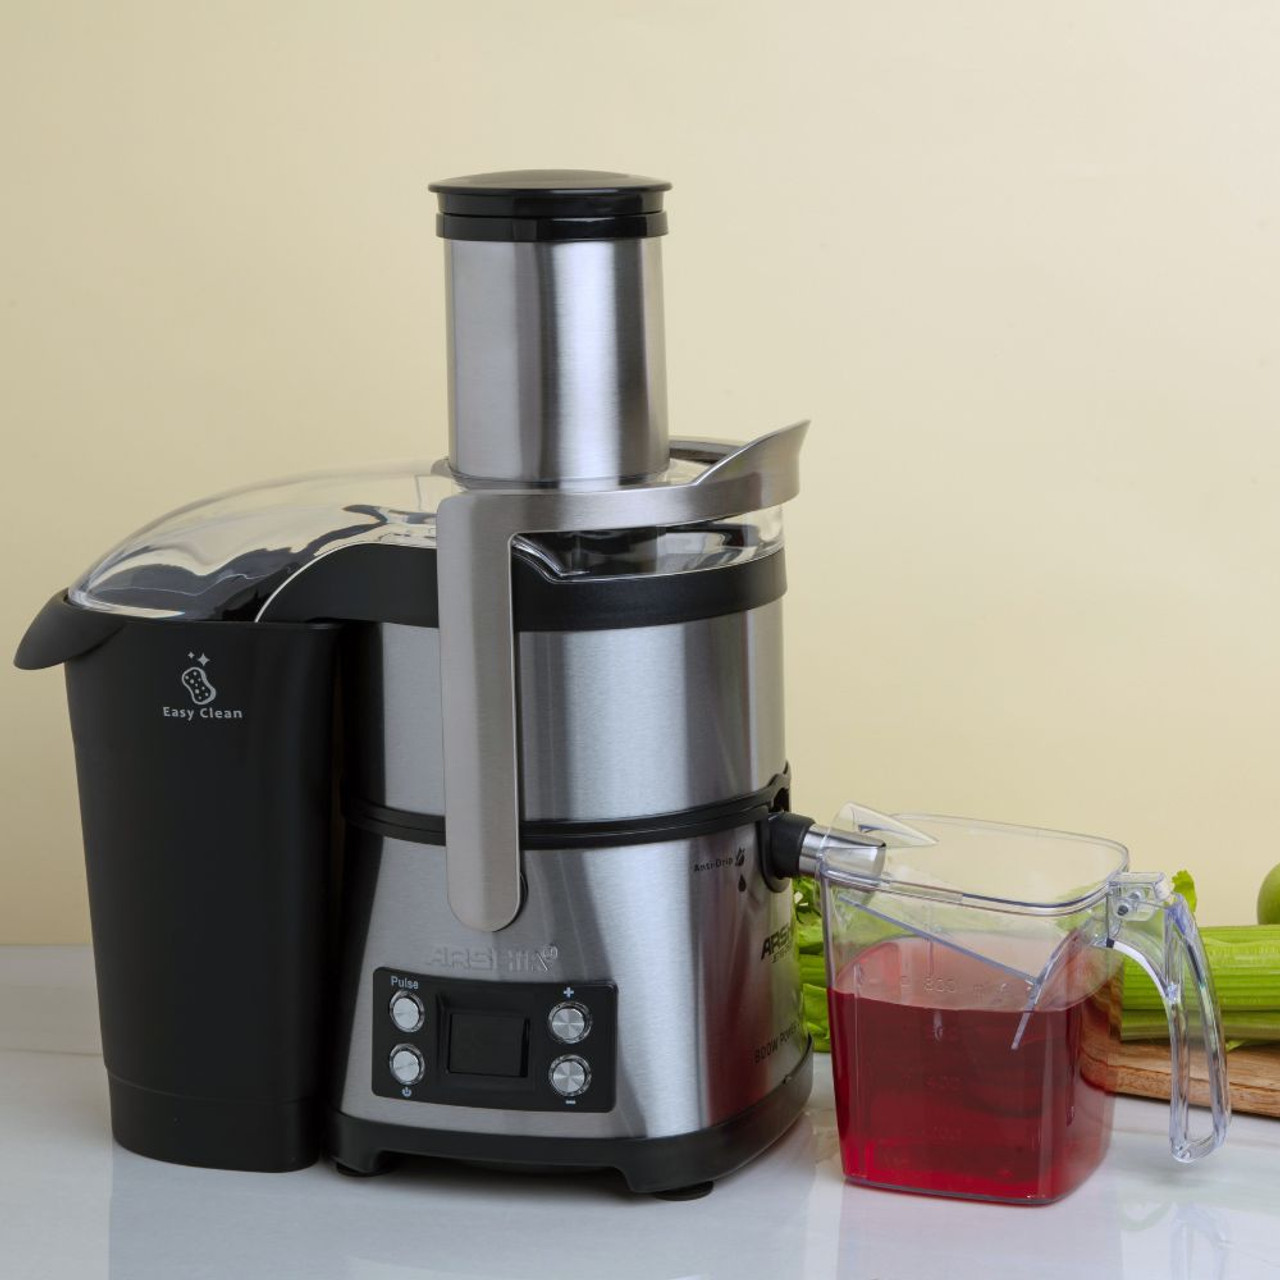 How To Make Cranberry Juice In A Juicer